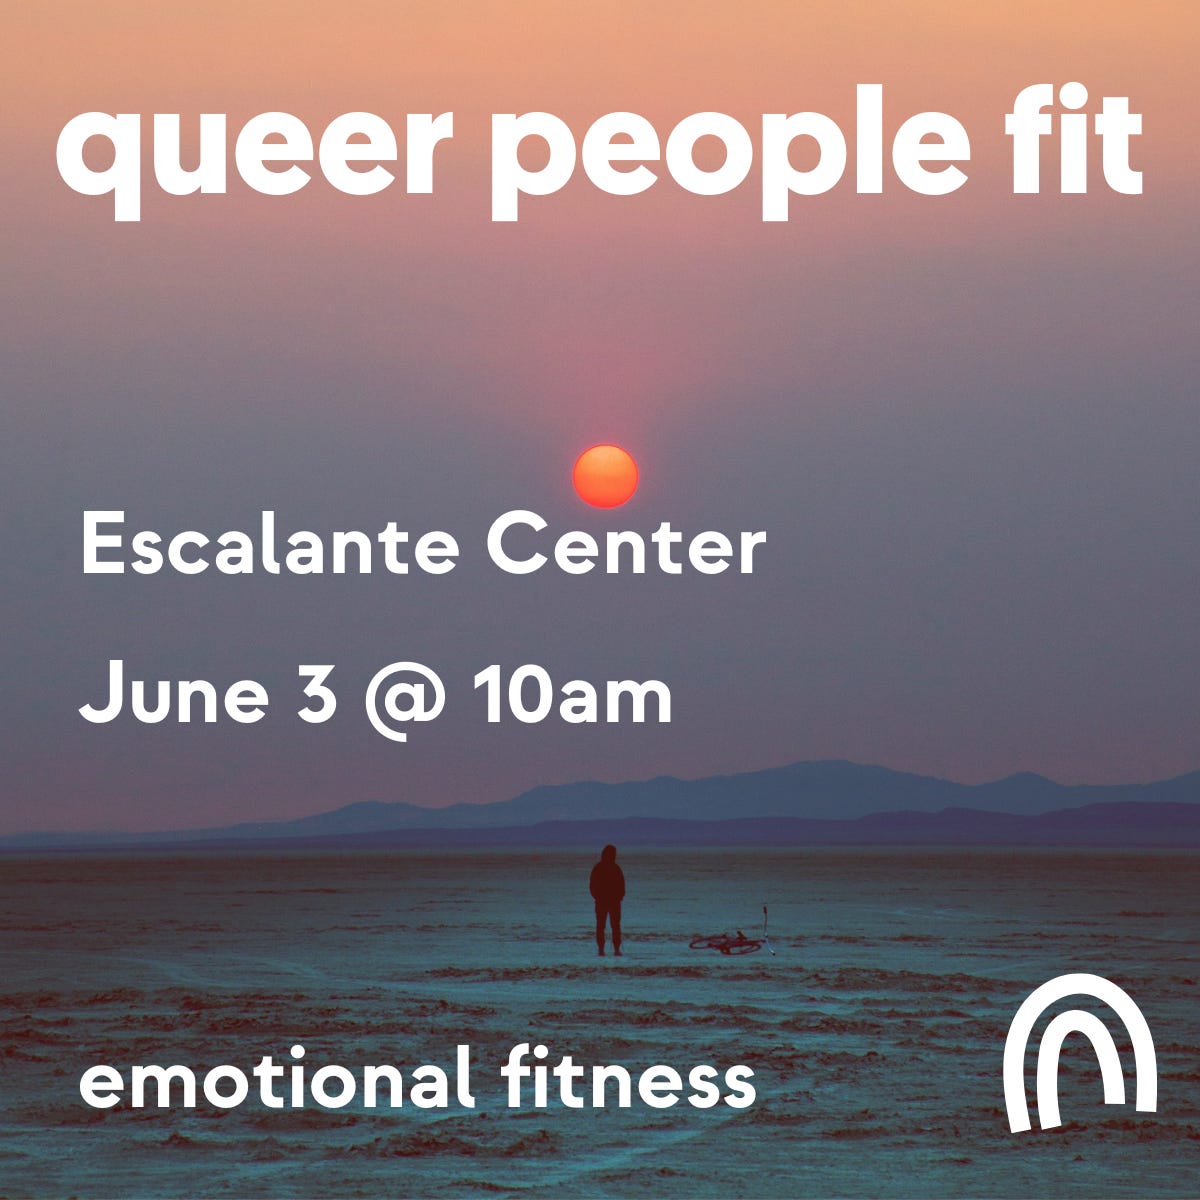 Queer People Fit. Escalante Center. June 3 @ 10am. Emotional Fitness.